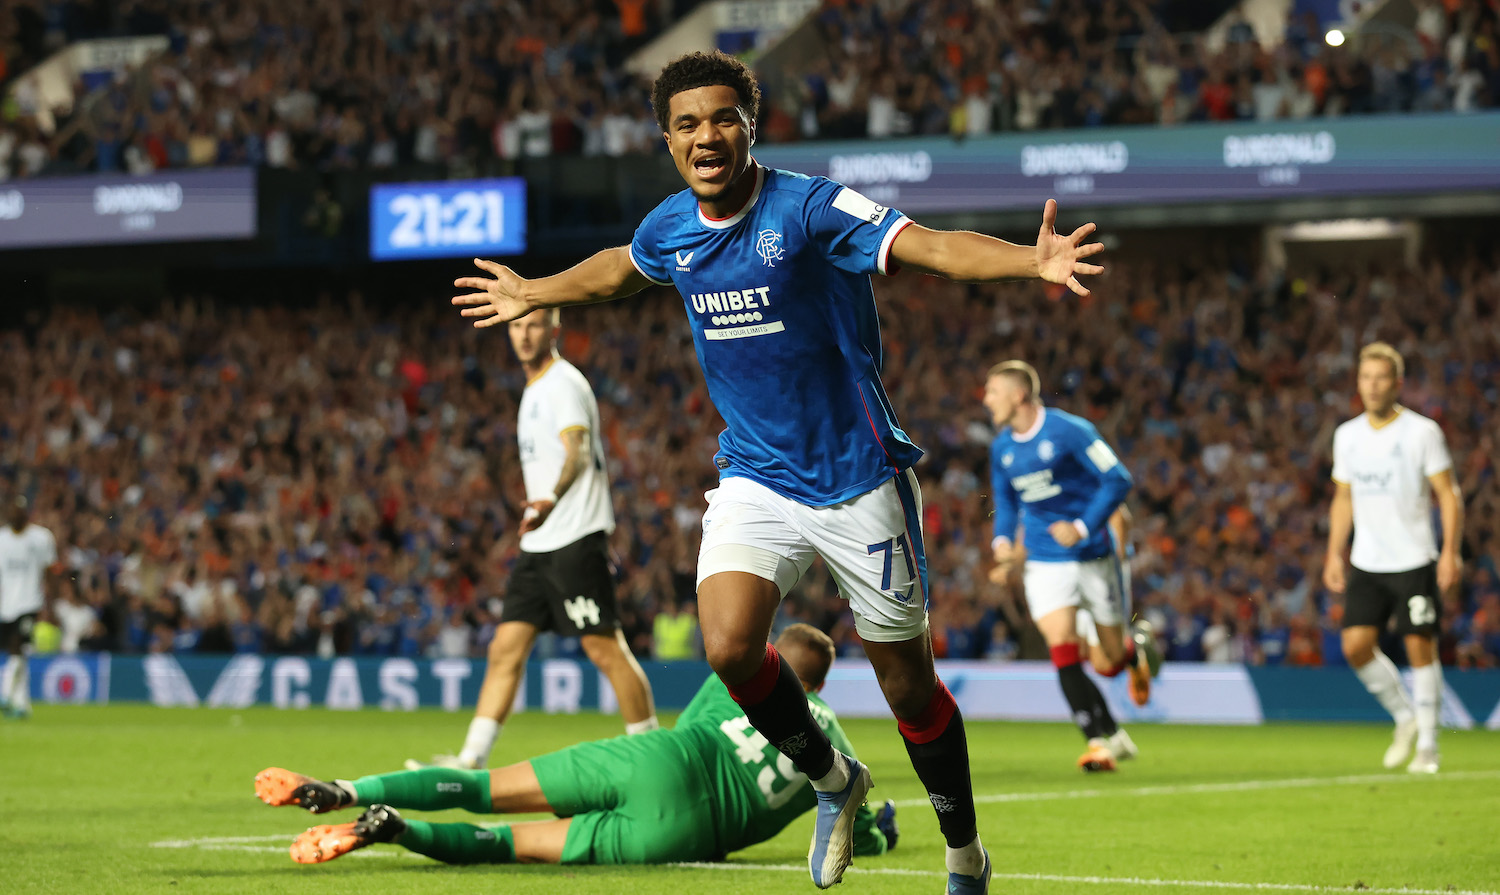 GLASGOW, SCOTLAND - AUGUST 09: Malik Tillman of Rangers celebrates scoring his team's third goal during the UEFA Champions League Third Qualifying Round second leg match between Glasgow Rangers and Royale Union Saint-Gilloise at Ibrox Stadium on August 09, 2022 in Glasgow, Scotland. (Photo by Ian MacNicol/Getty Images)